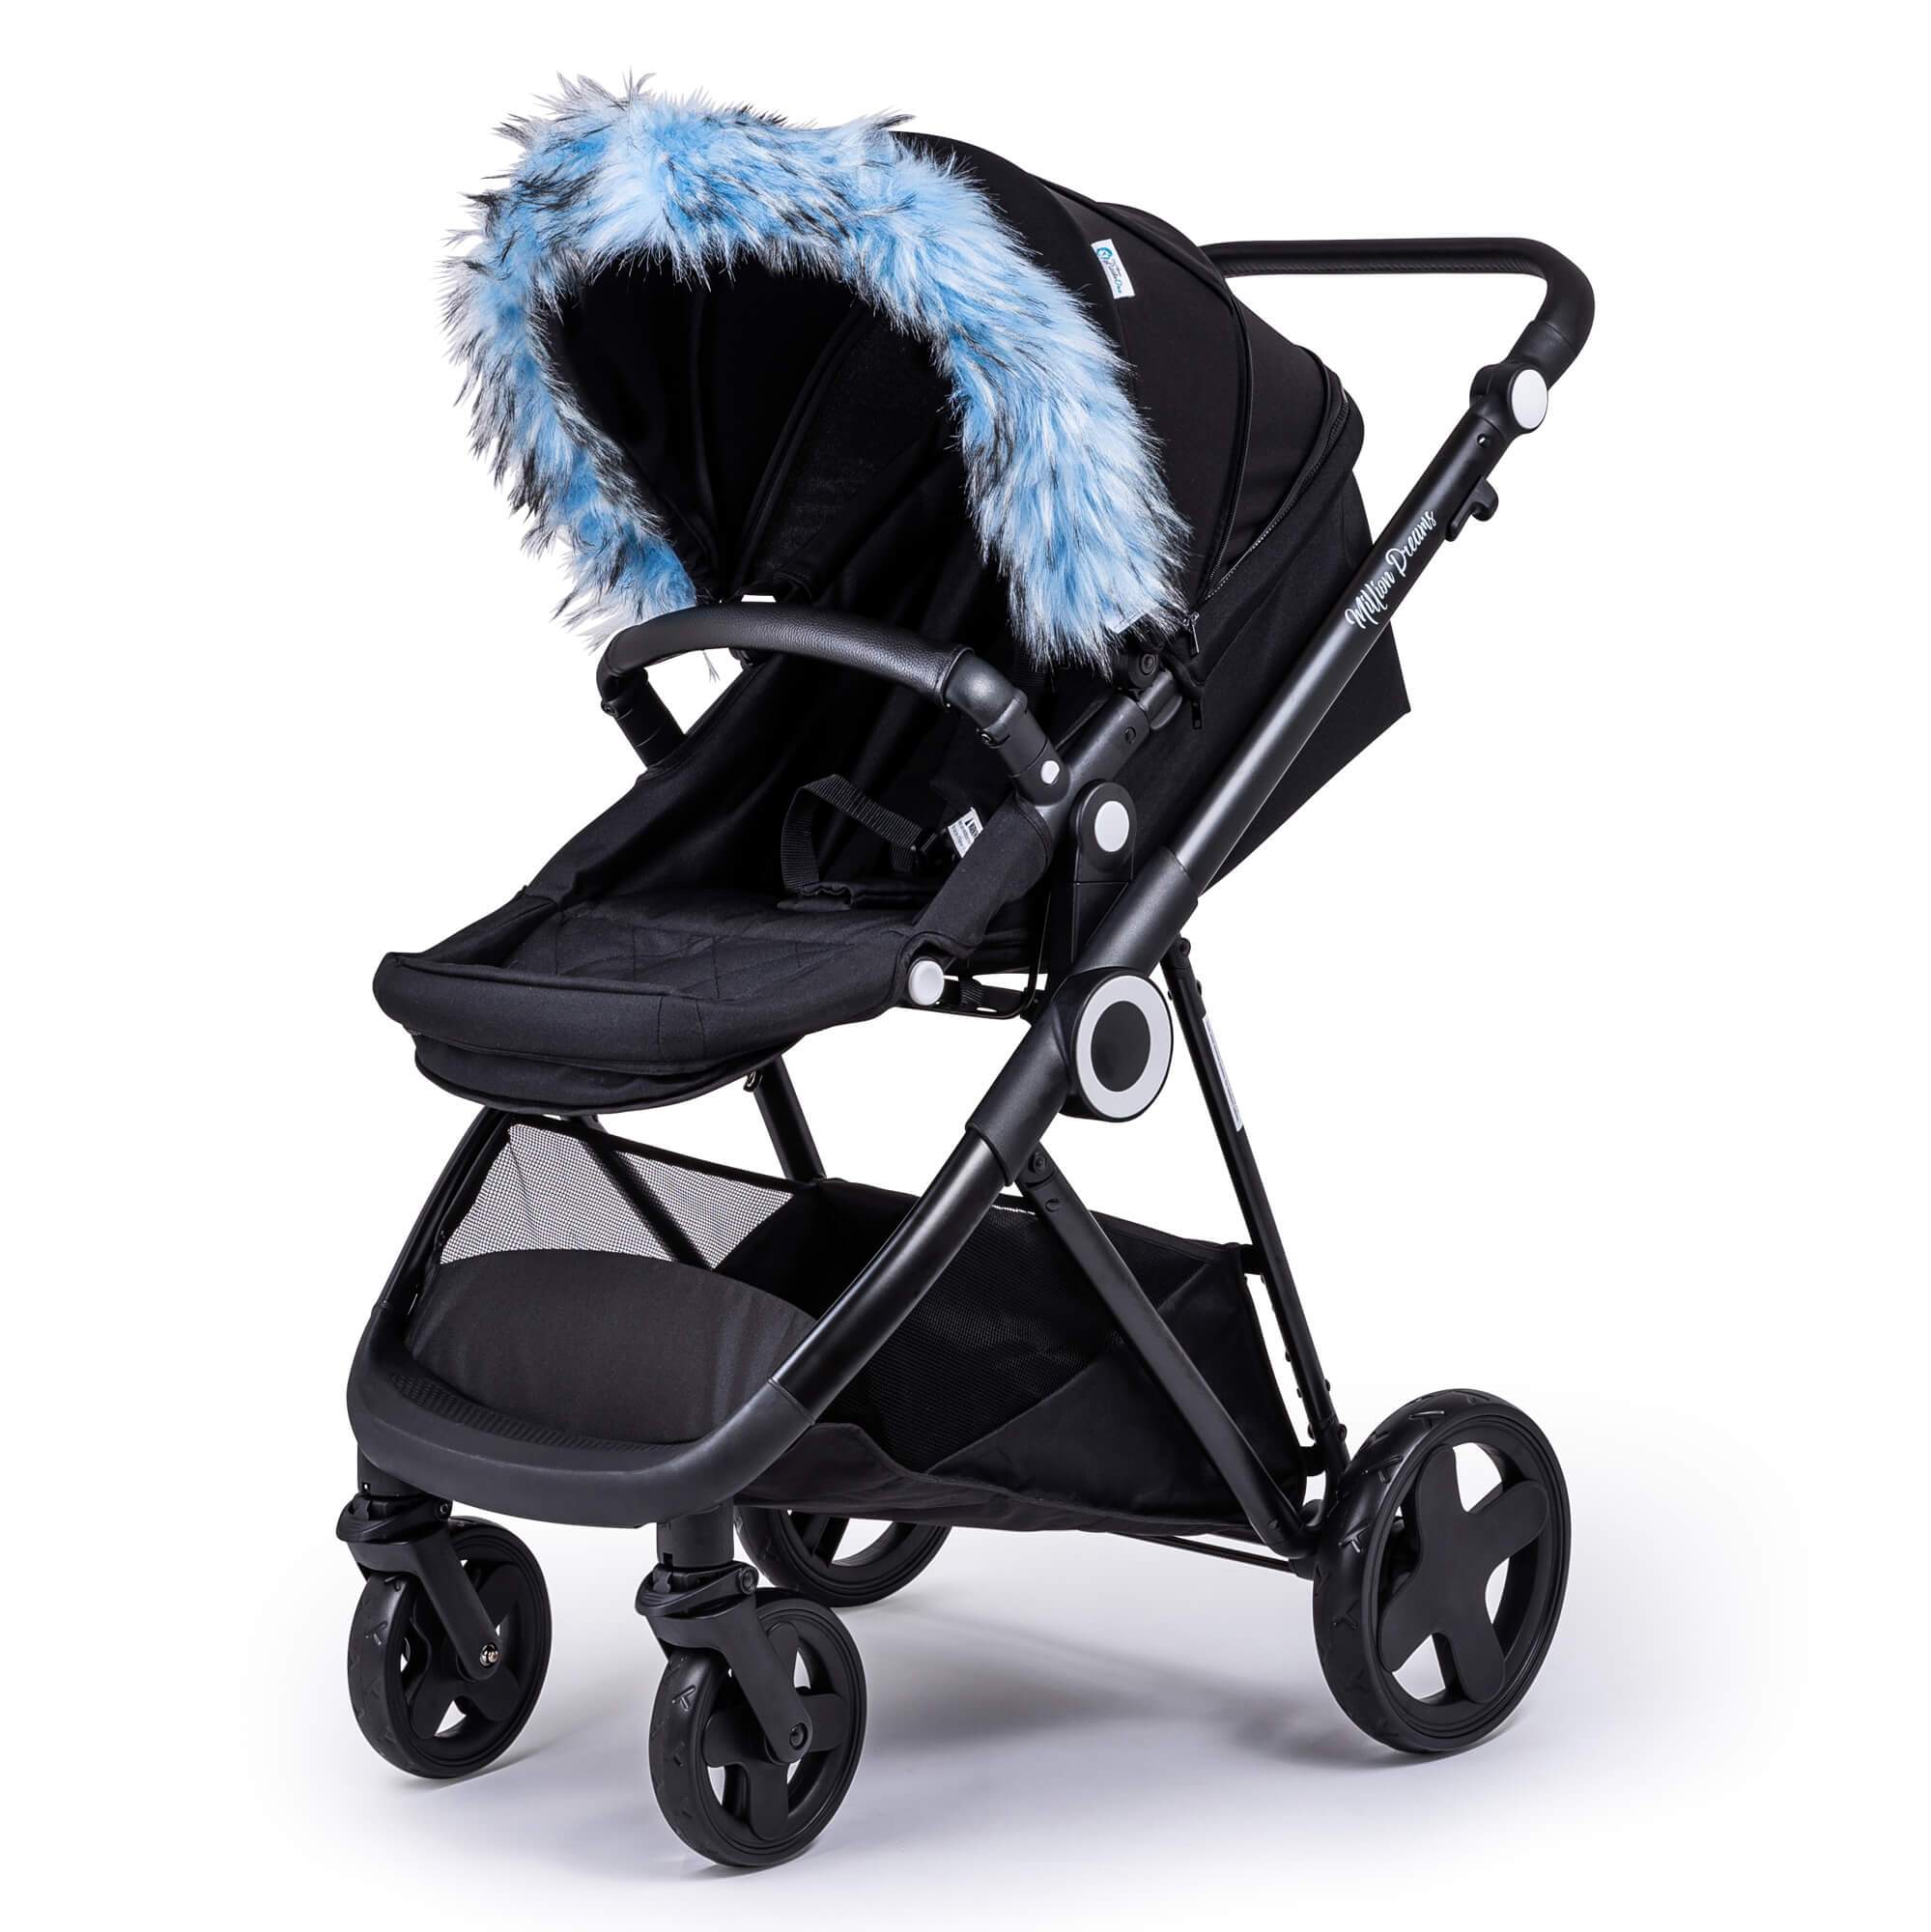 Pram Fur Hood Trim Attachment for Pushchair Compatible with Babywelt - Light Blue / Fits All Models | For Your Little One